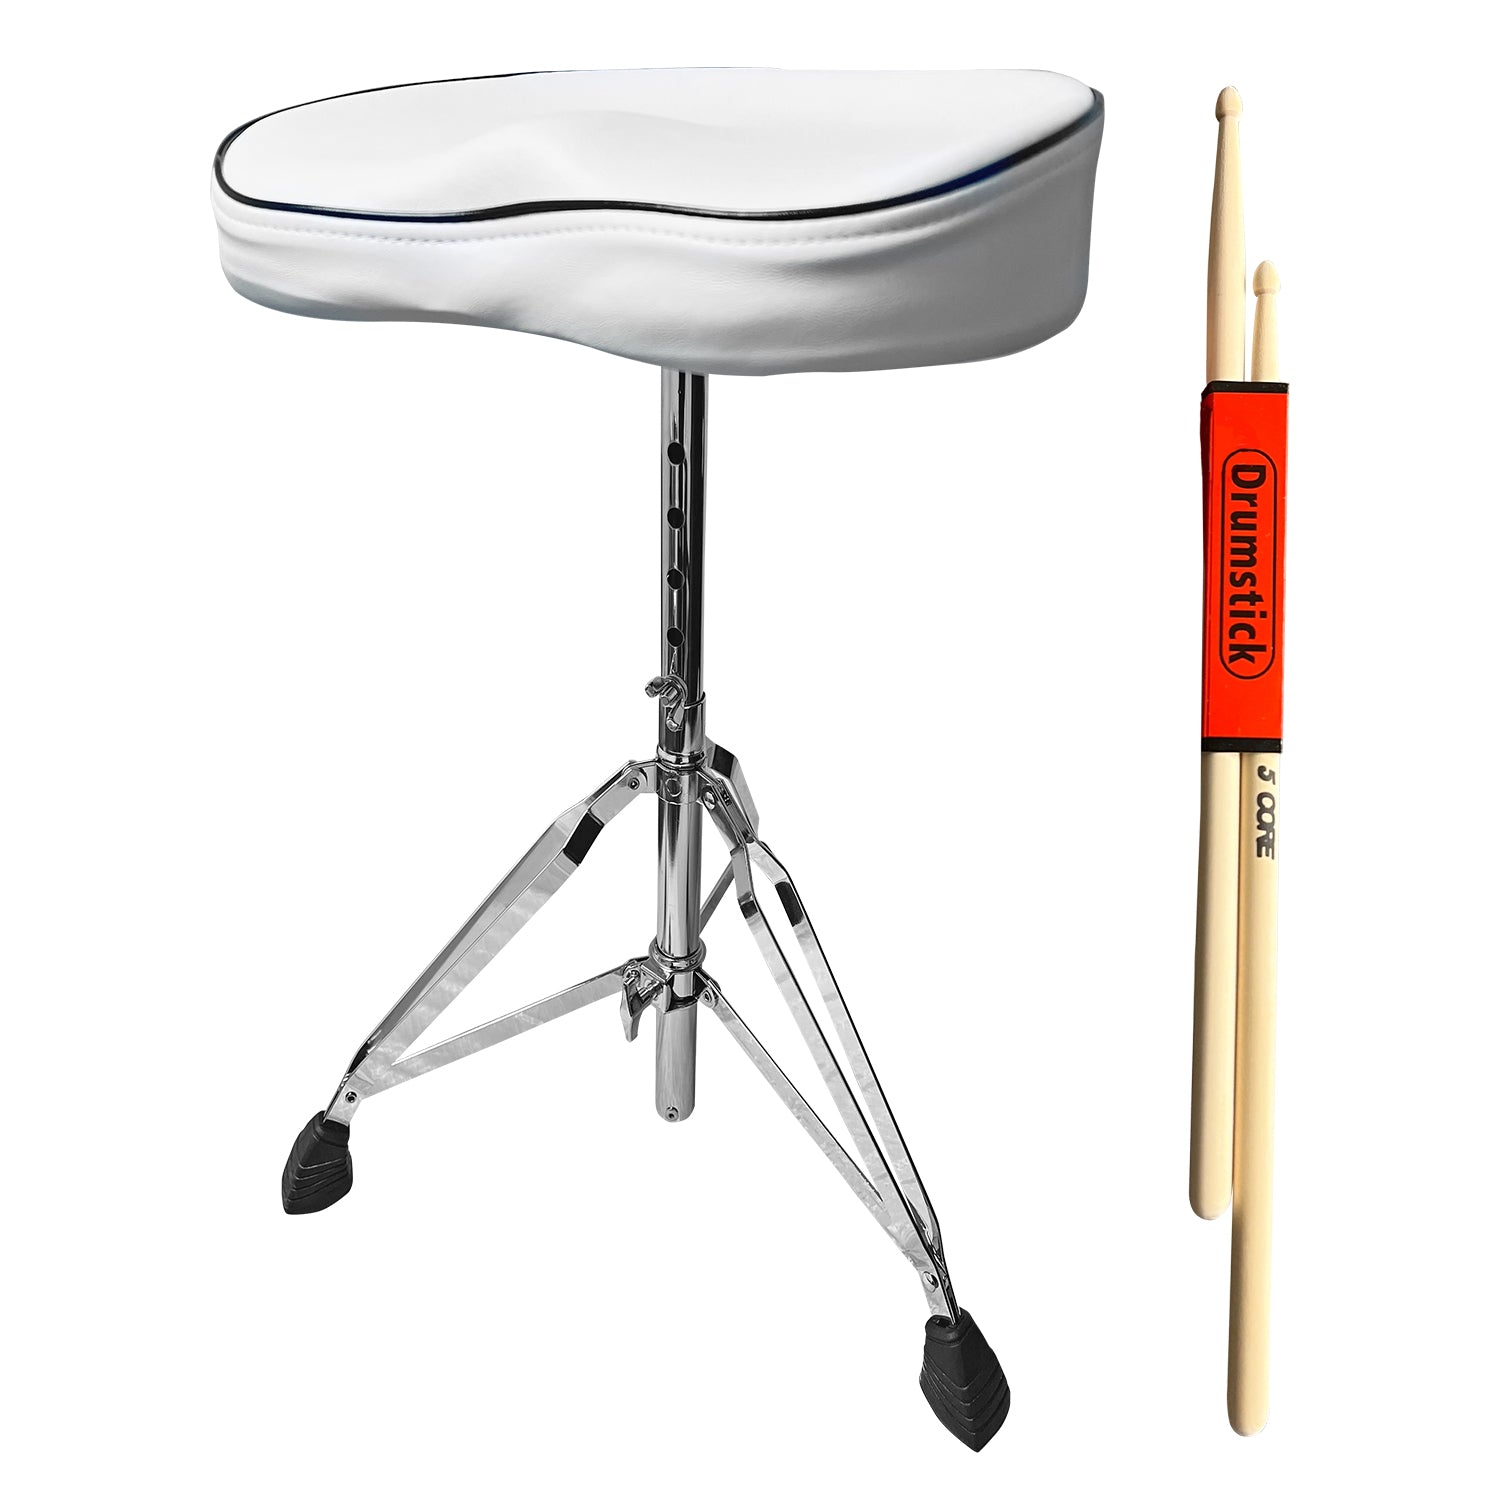 5 Core Drum Throne Thick Padded Comfortable Guitar Stool with Memory Foam Adjustable Padded Keyboard Chair Metal Piano Stool Premium Musician Chair White - DS CH WH SDL